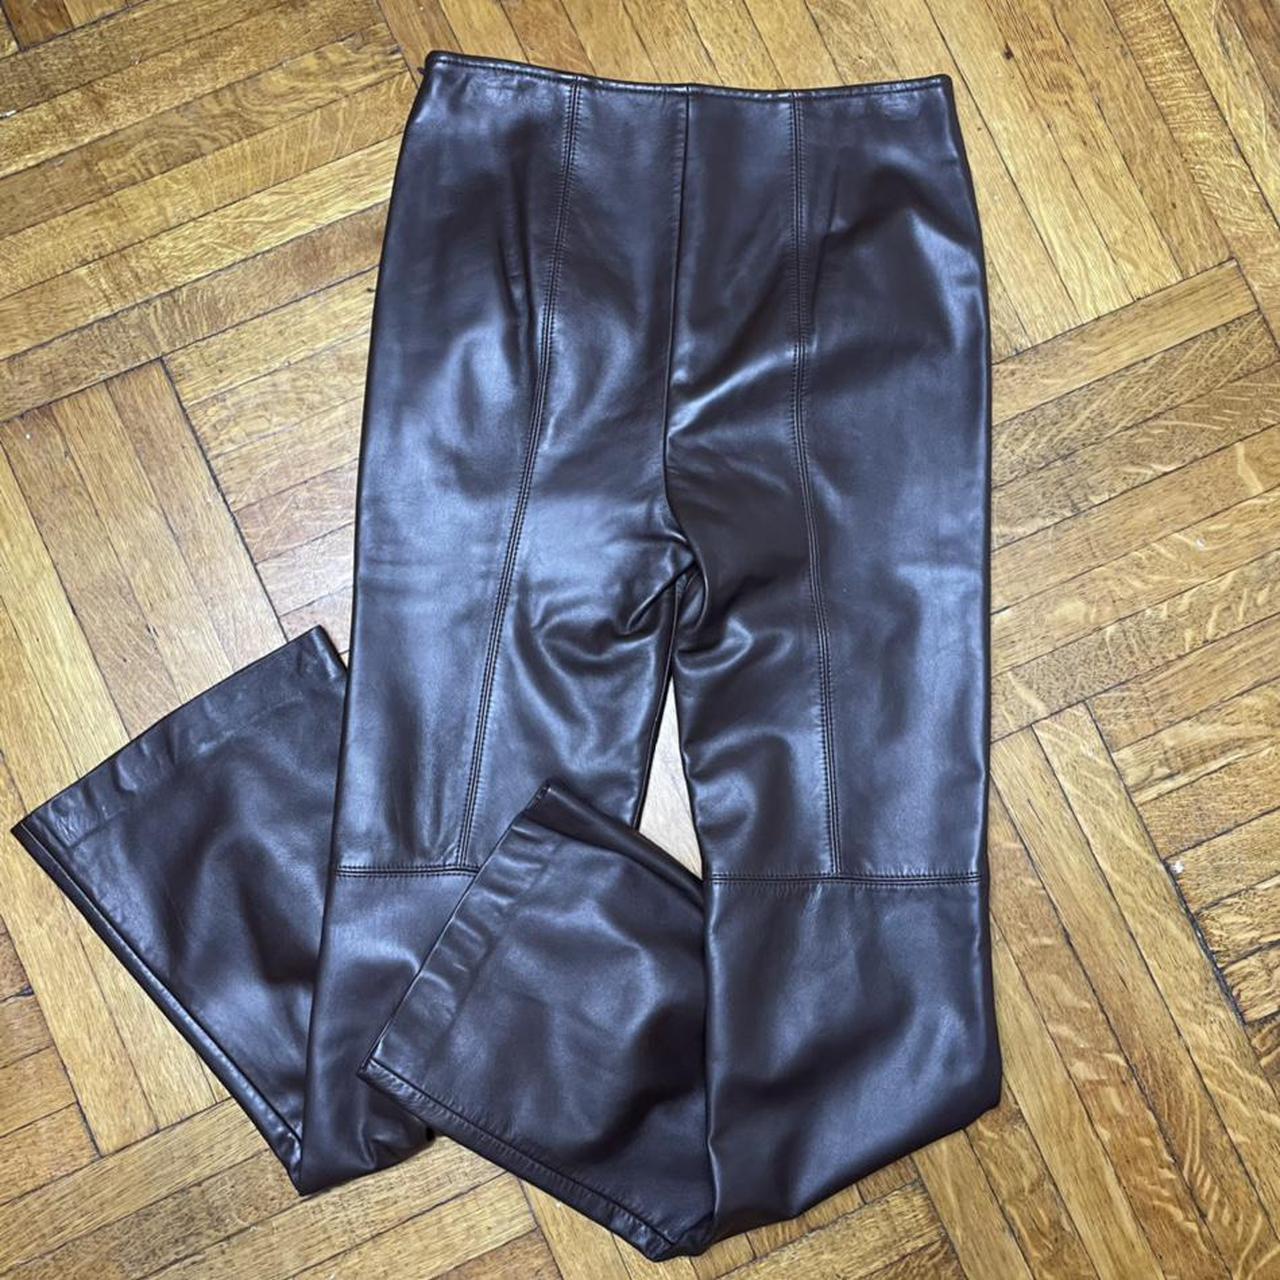 Product Image 1 - Escada brown leather pants. Side